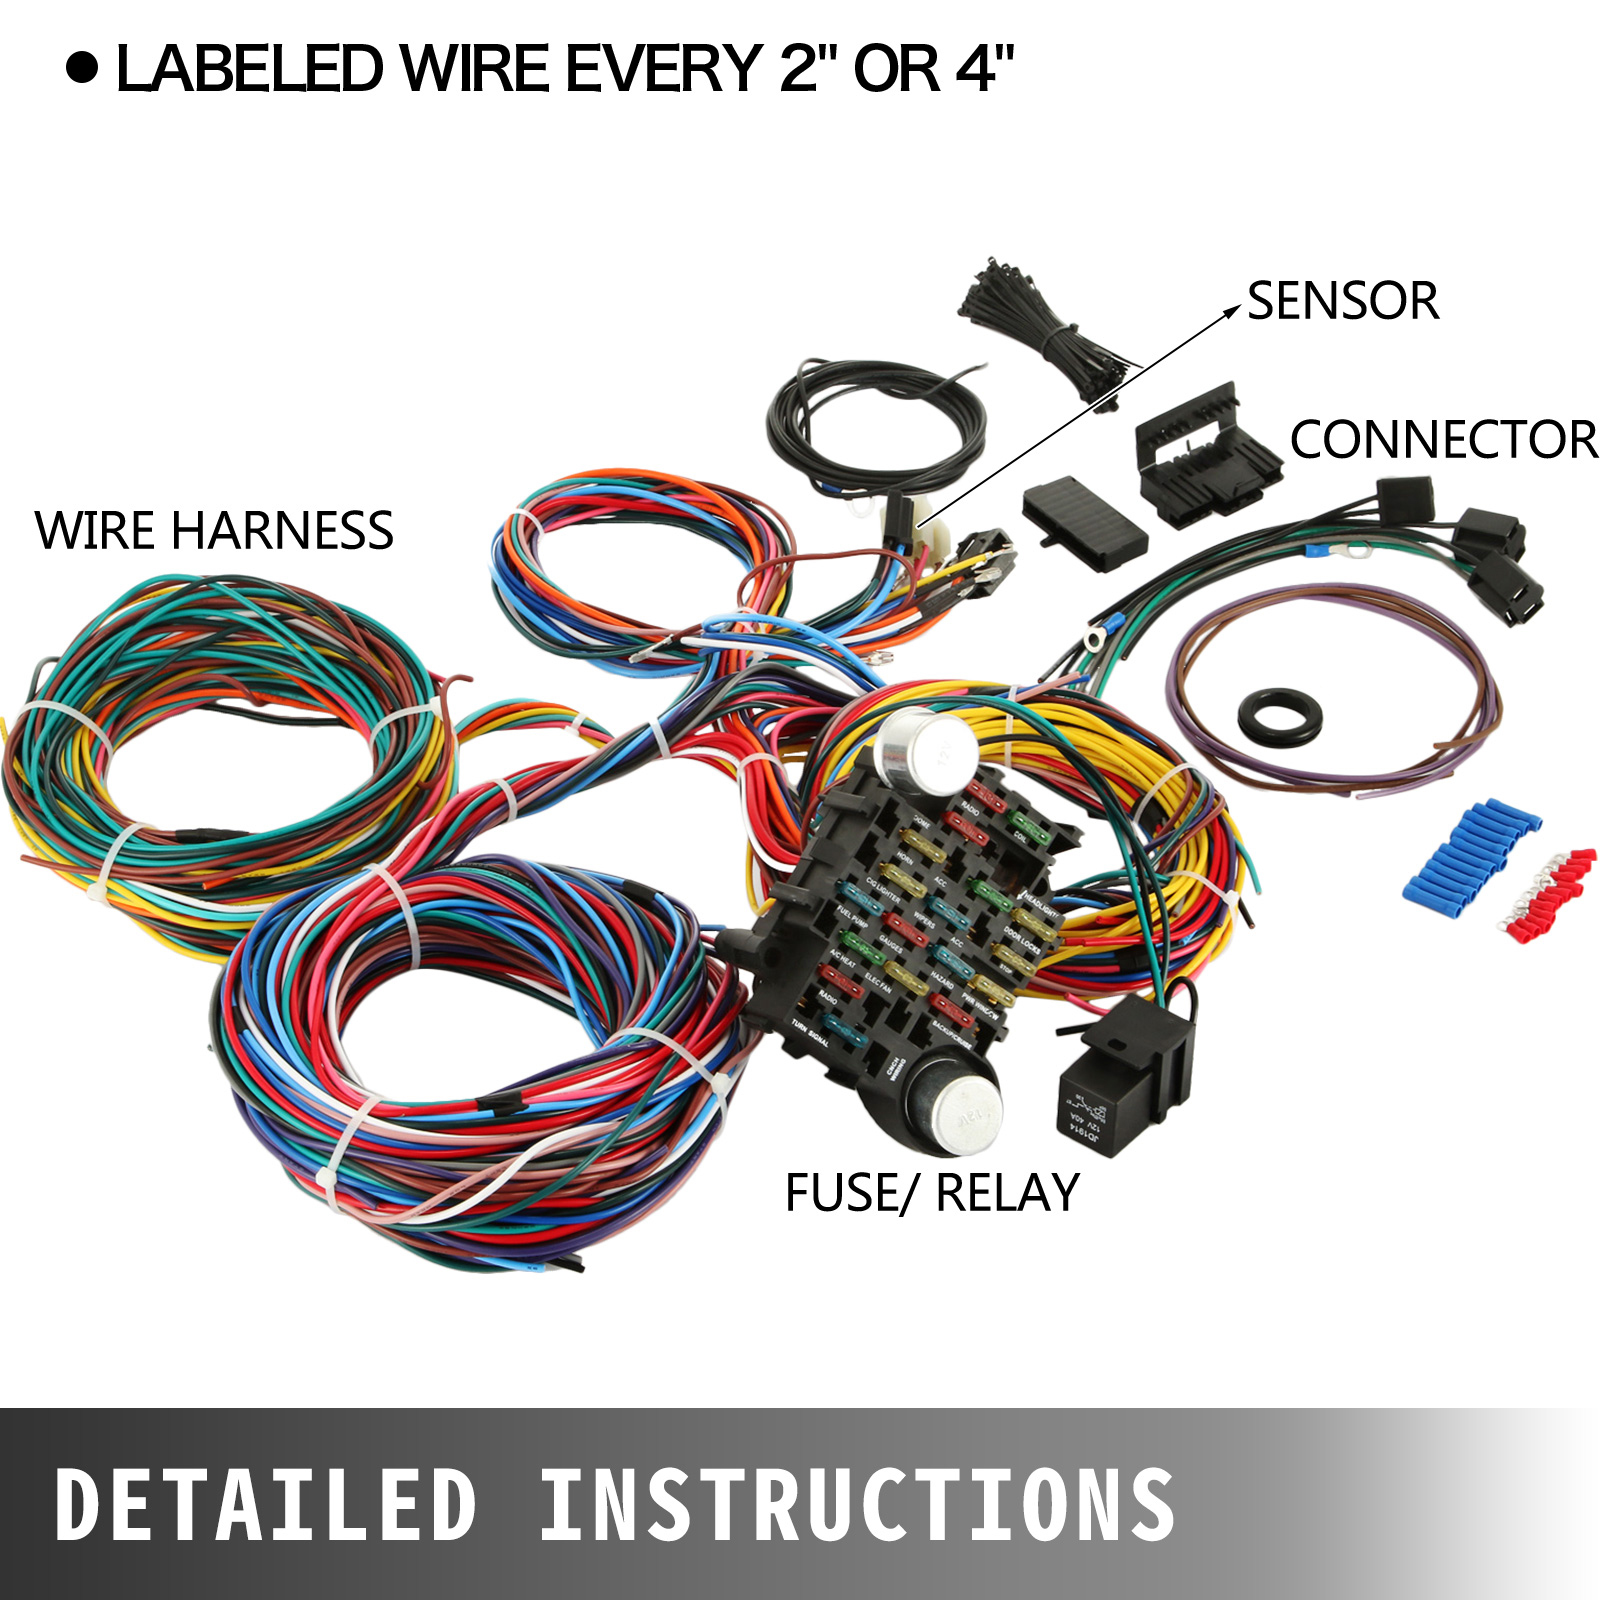 Universal X-long Wires / 21 Circuit Wiring Harness Fit Chevy Mopar Ford